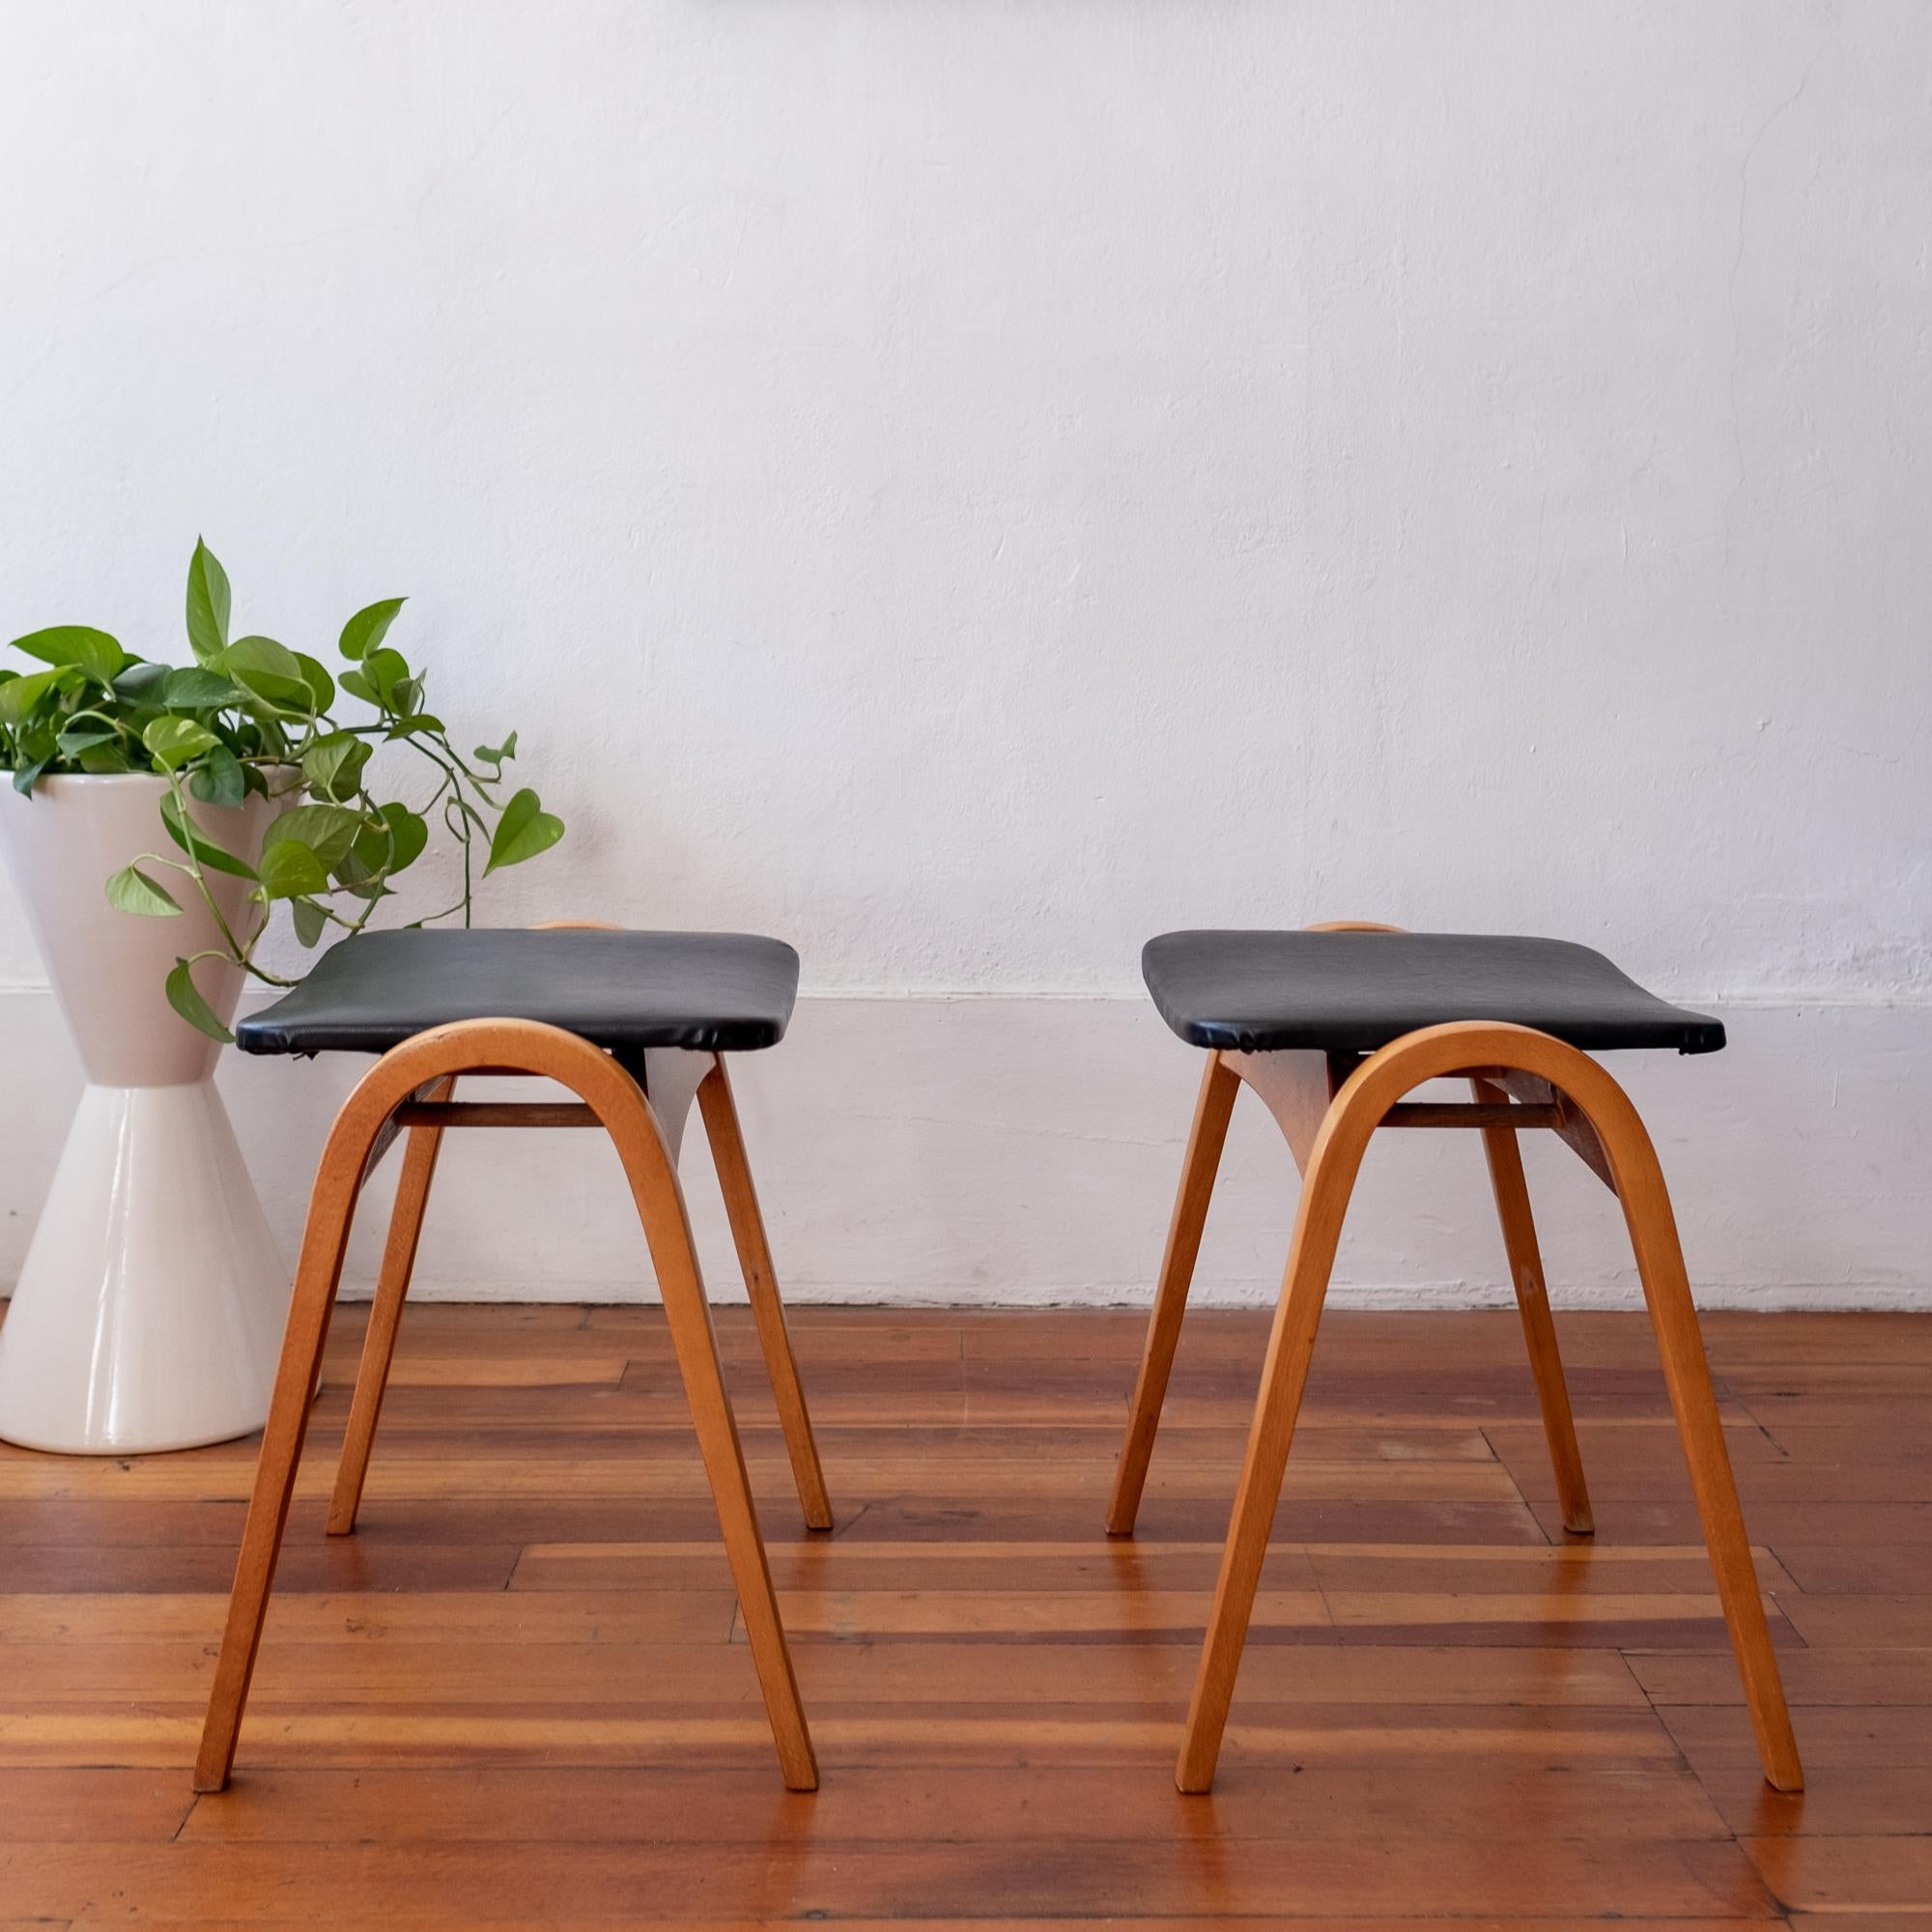 A pair of bentwood stacking stools by Isamu Kenmochi for Akita Mokko, Japan, 1958.

Source: Japanese Modern: Retrospective Kenmochi Isamu, Kenmochi

Isamu Kenmochi (Japanese: ???, 1912 -1971) was a Japanese modernist designer significant in the